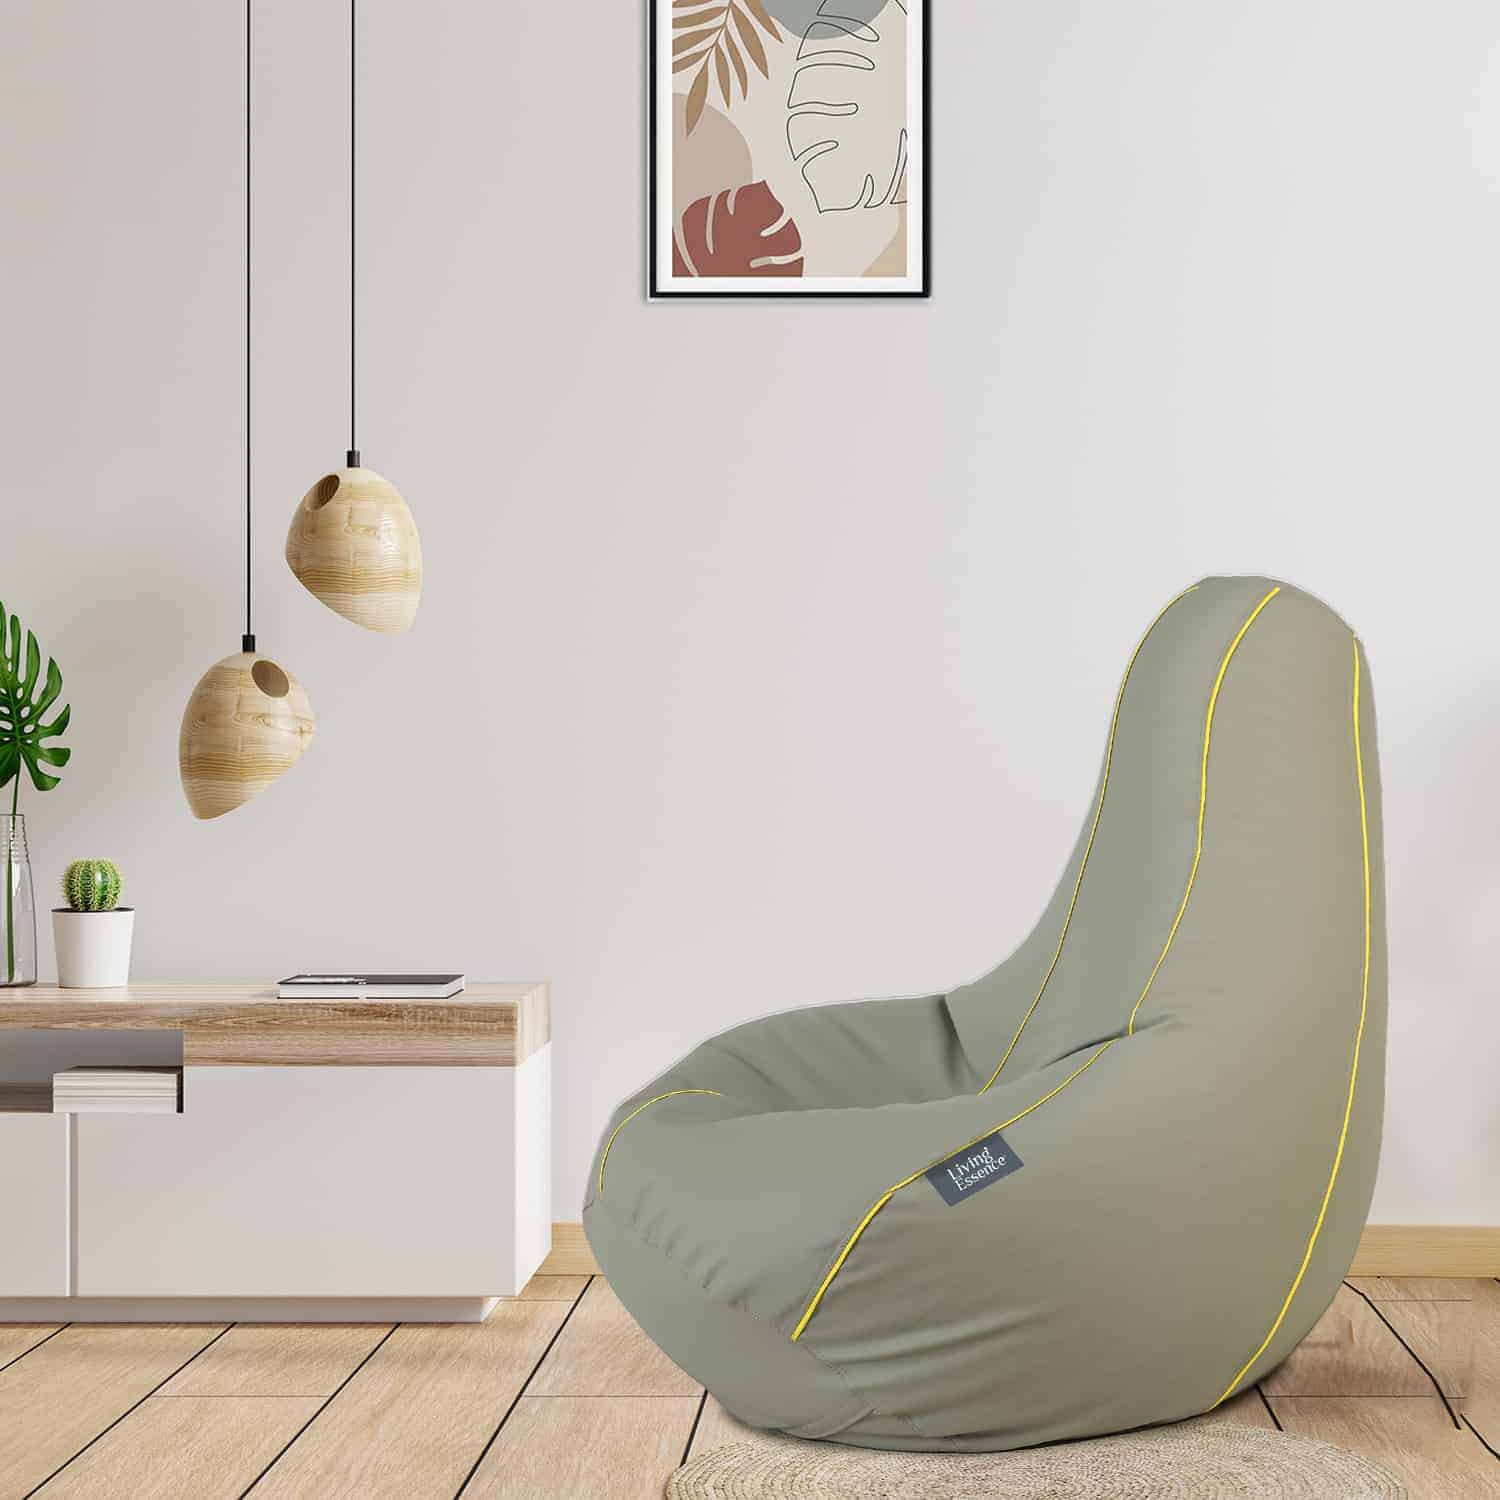 Grey leatherette giant bean bag chair with wooden flooring and pendant lights